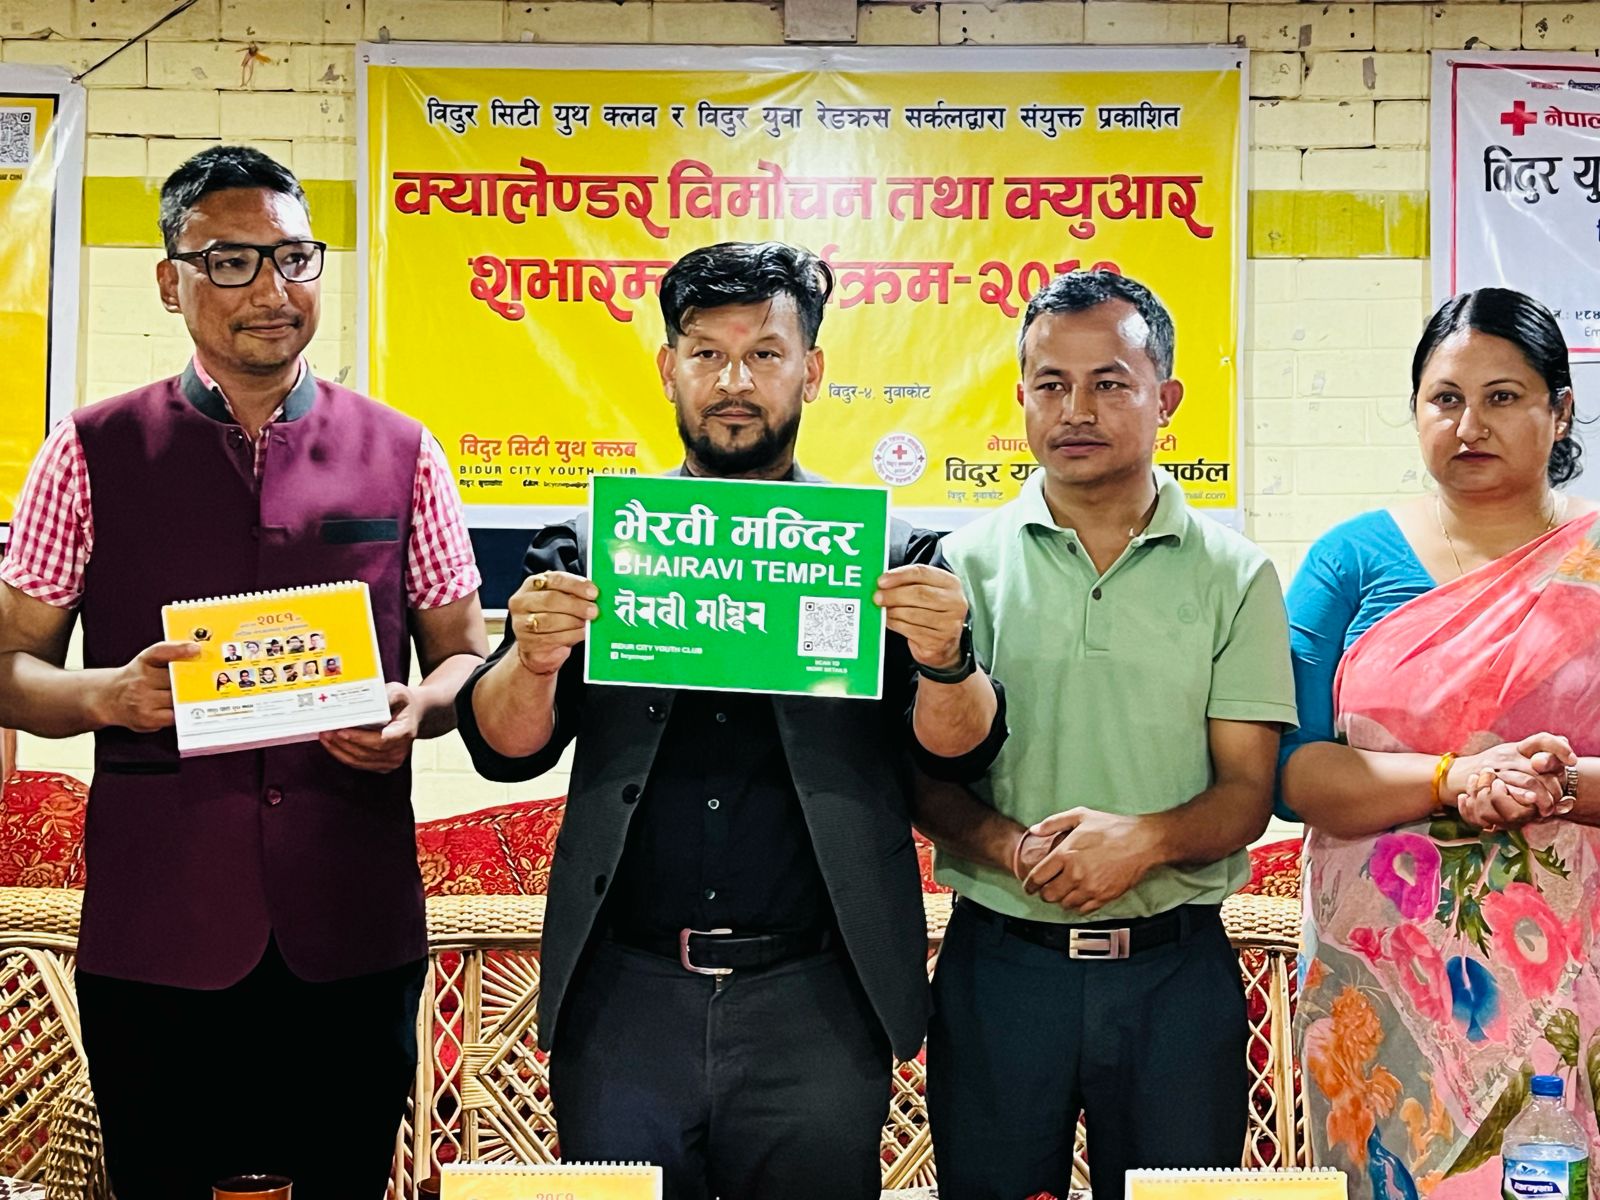 bcyc released new year 2081 calendar and nuwakot bhairavi information QR project launch